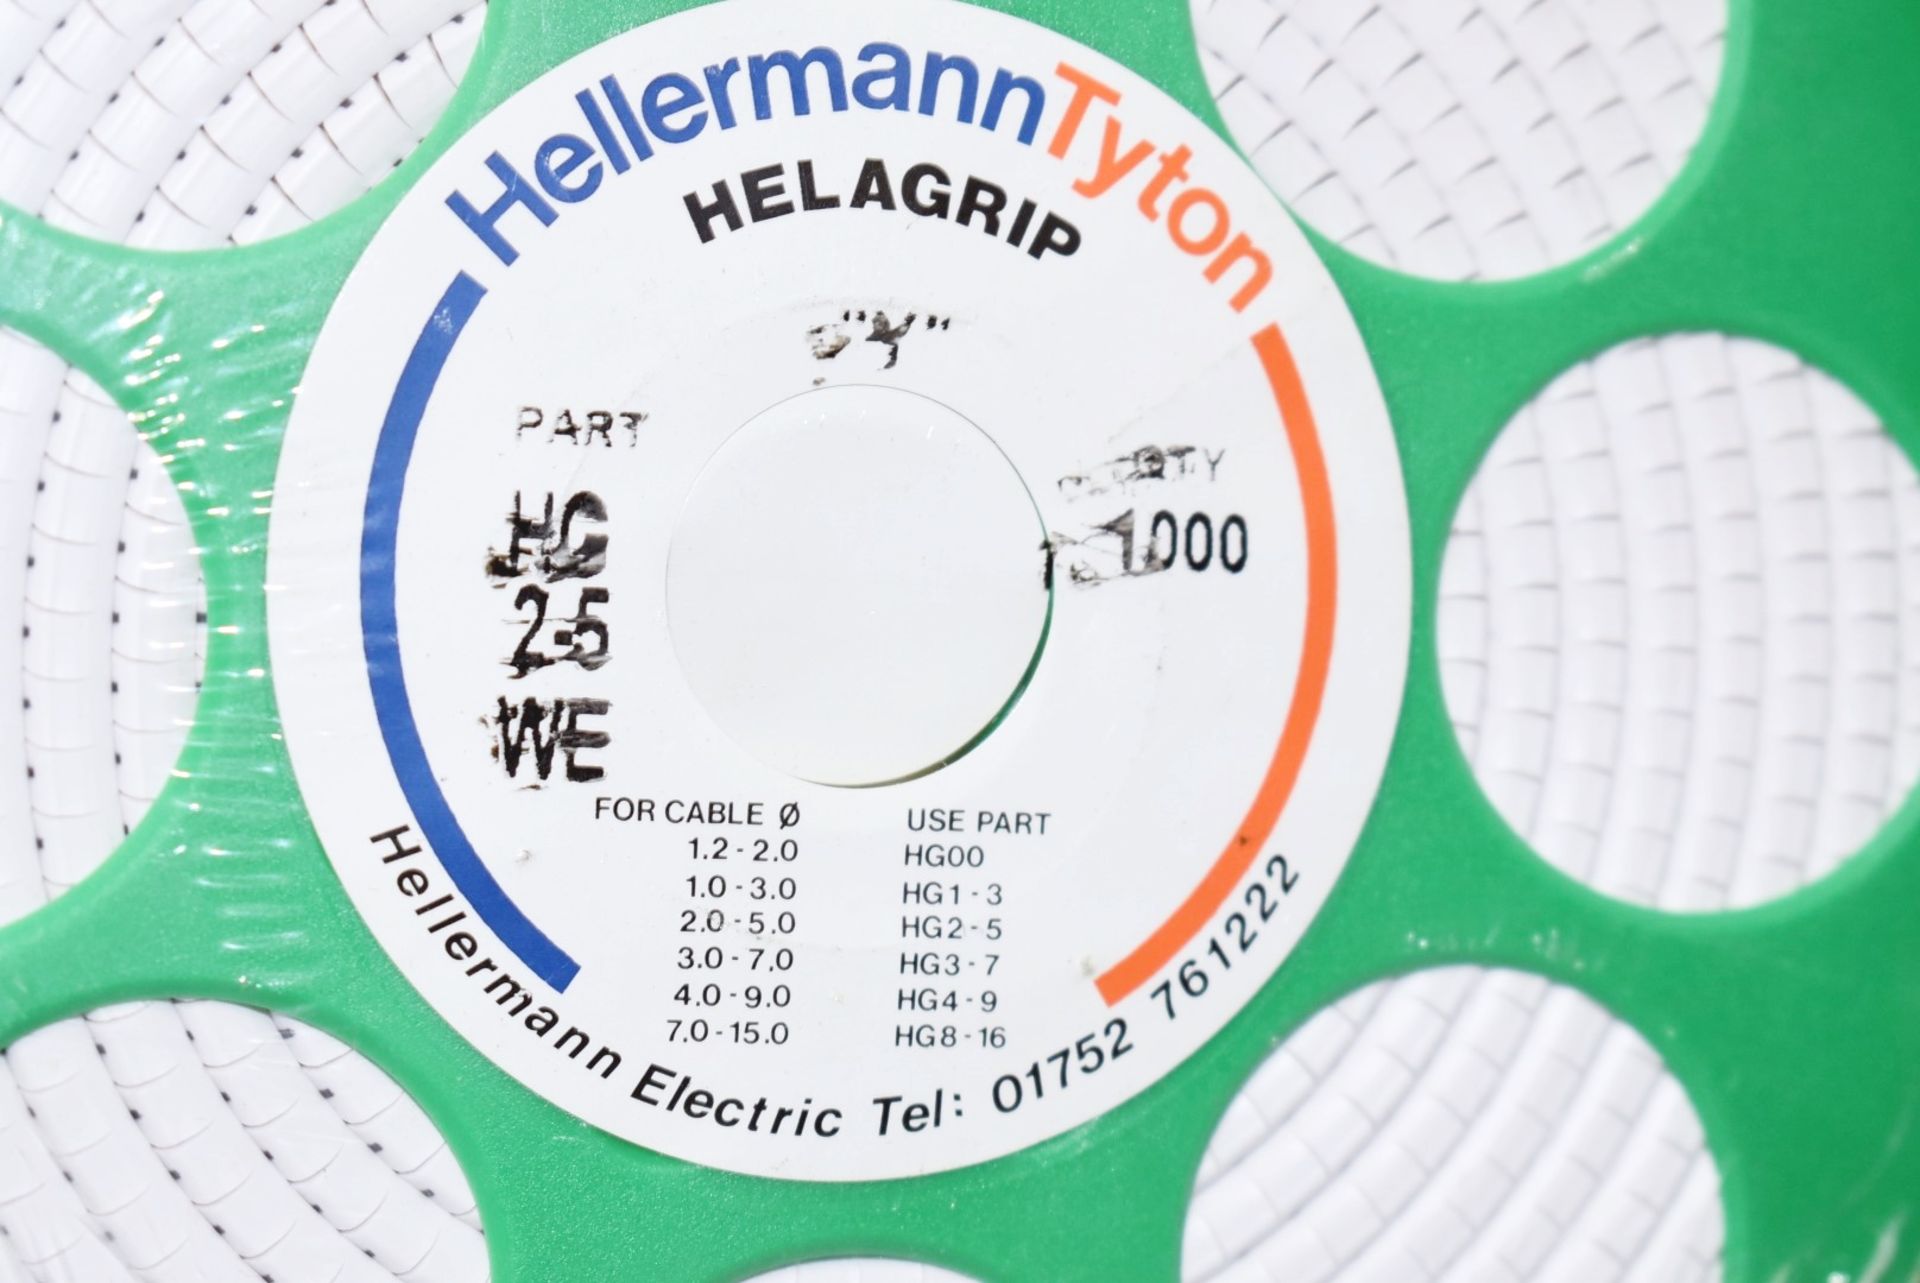 3 x Containers Including HellermannTyton Helagrip Slide On Cable Markers - Selection Numbers/Letters - Image 11 of 17